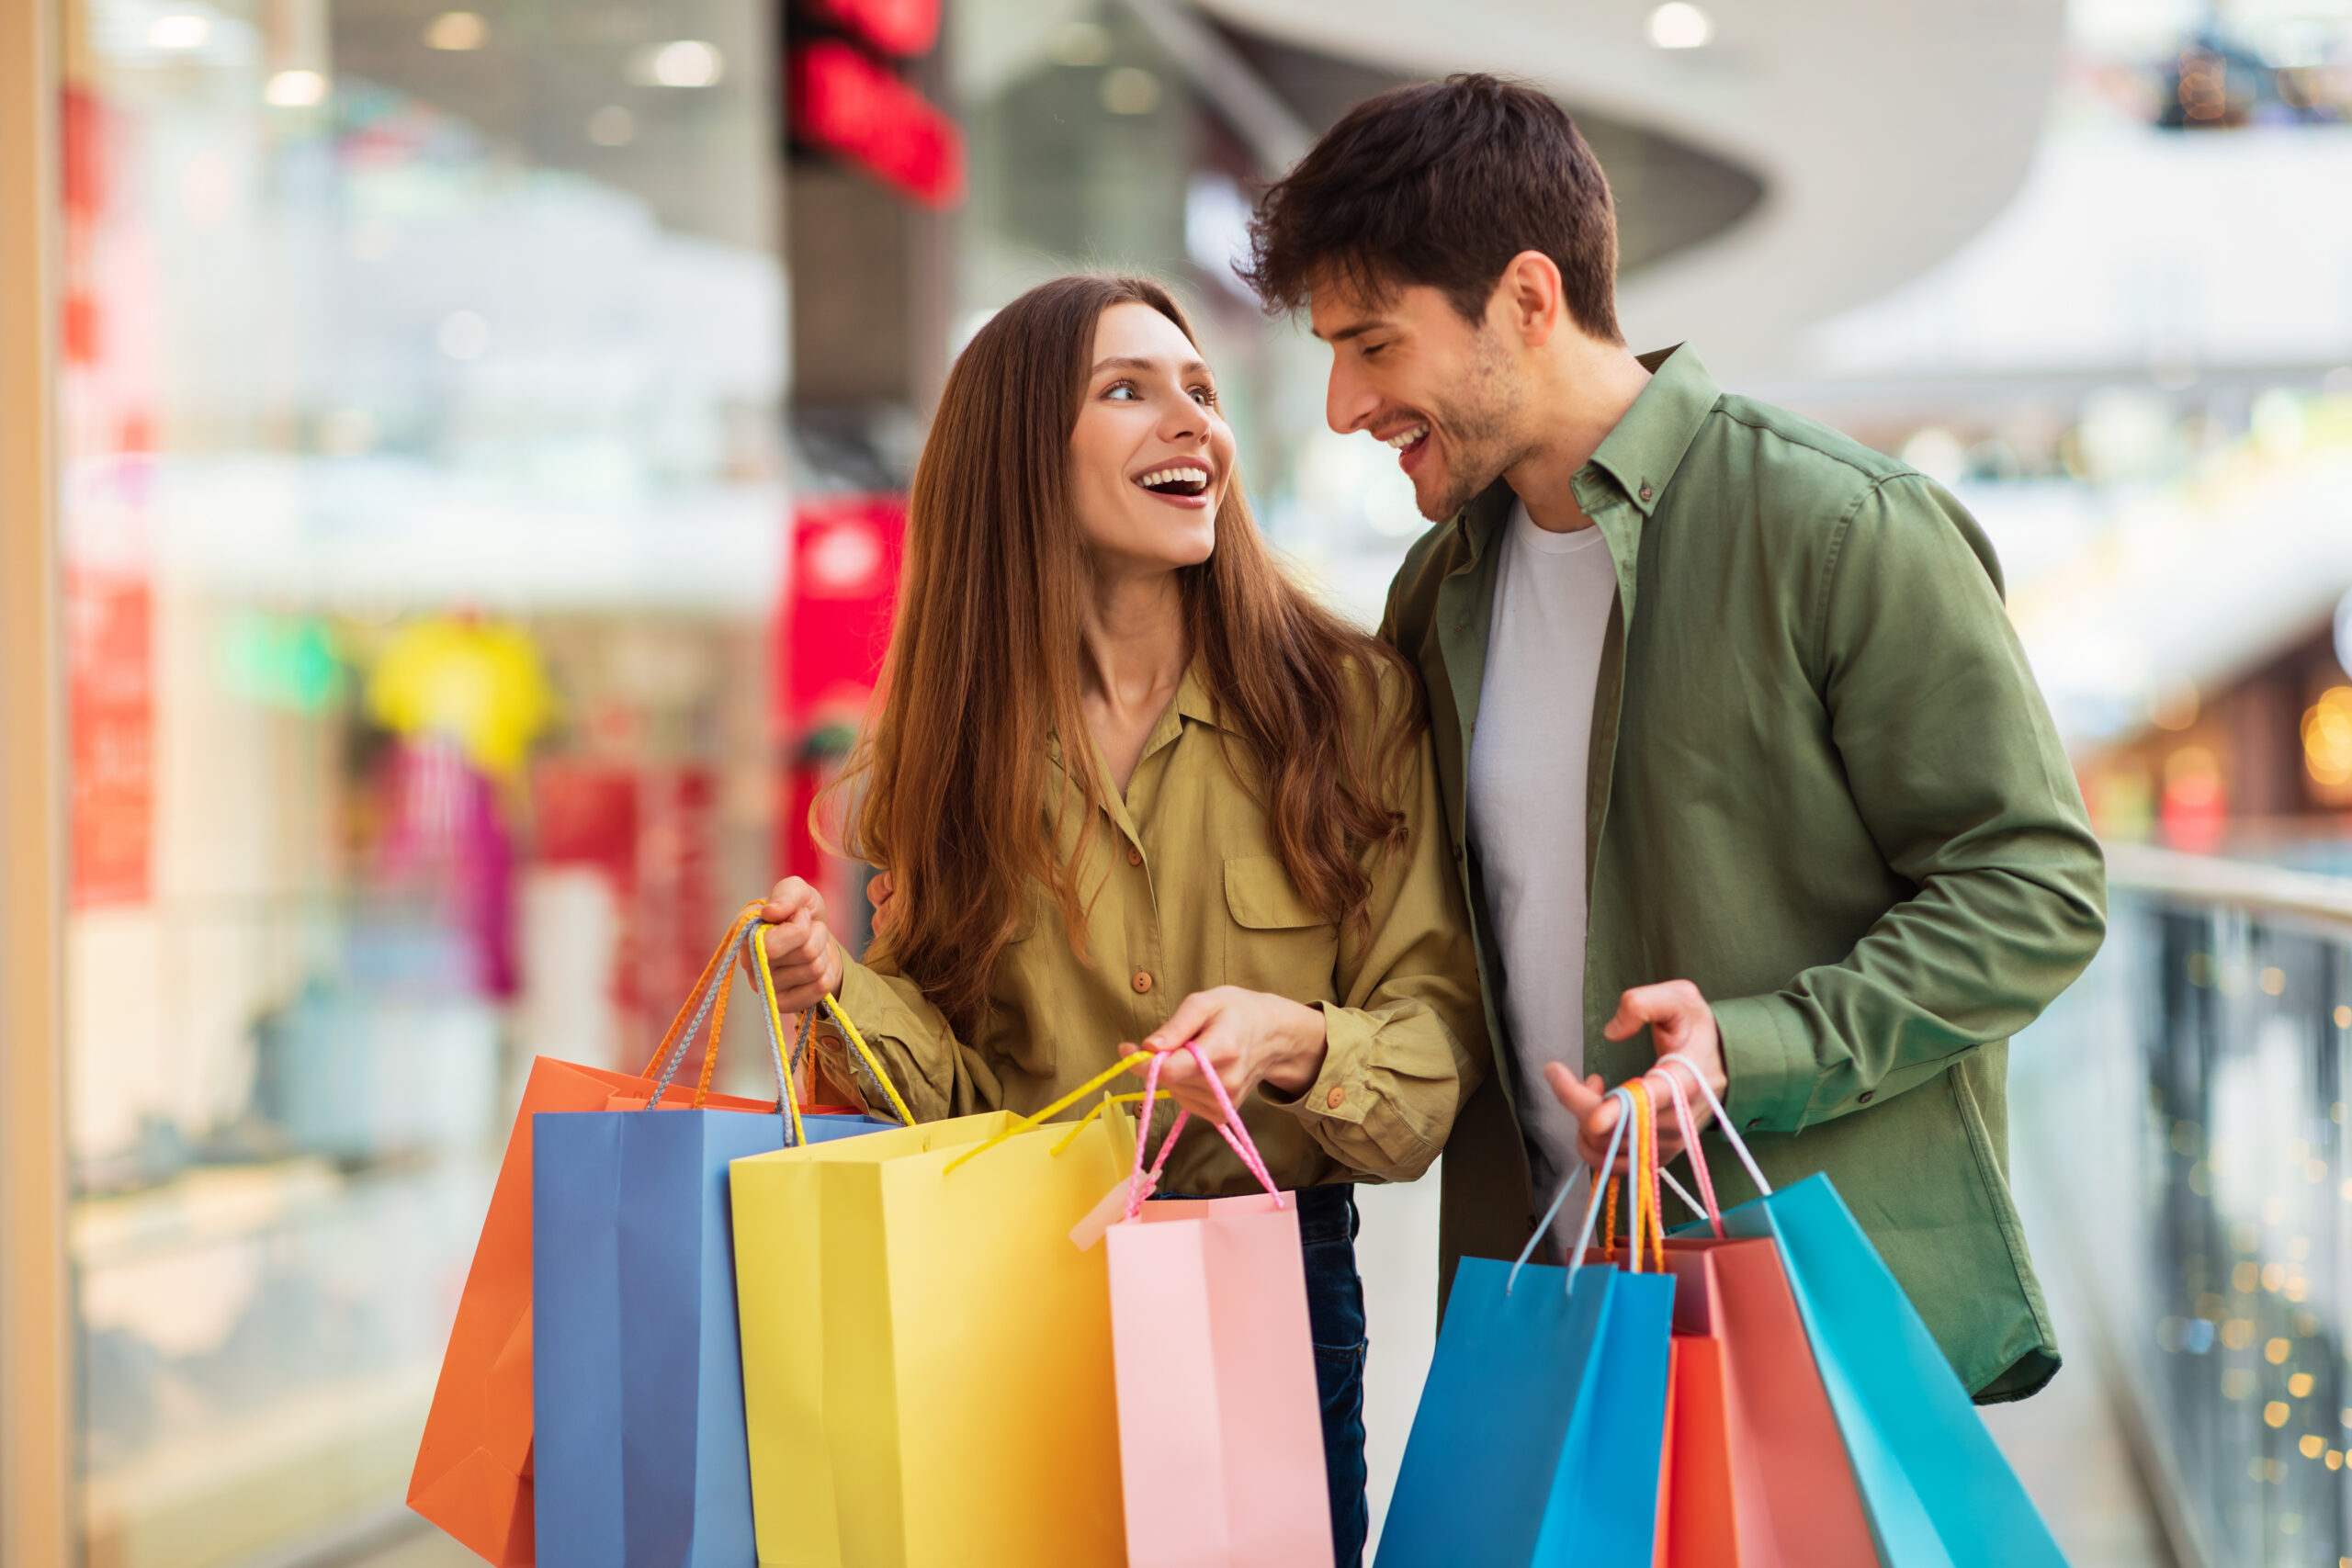 Image of a male and female couple shopping